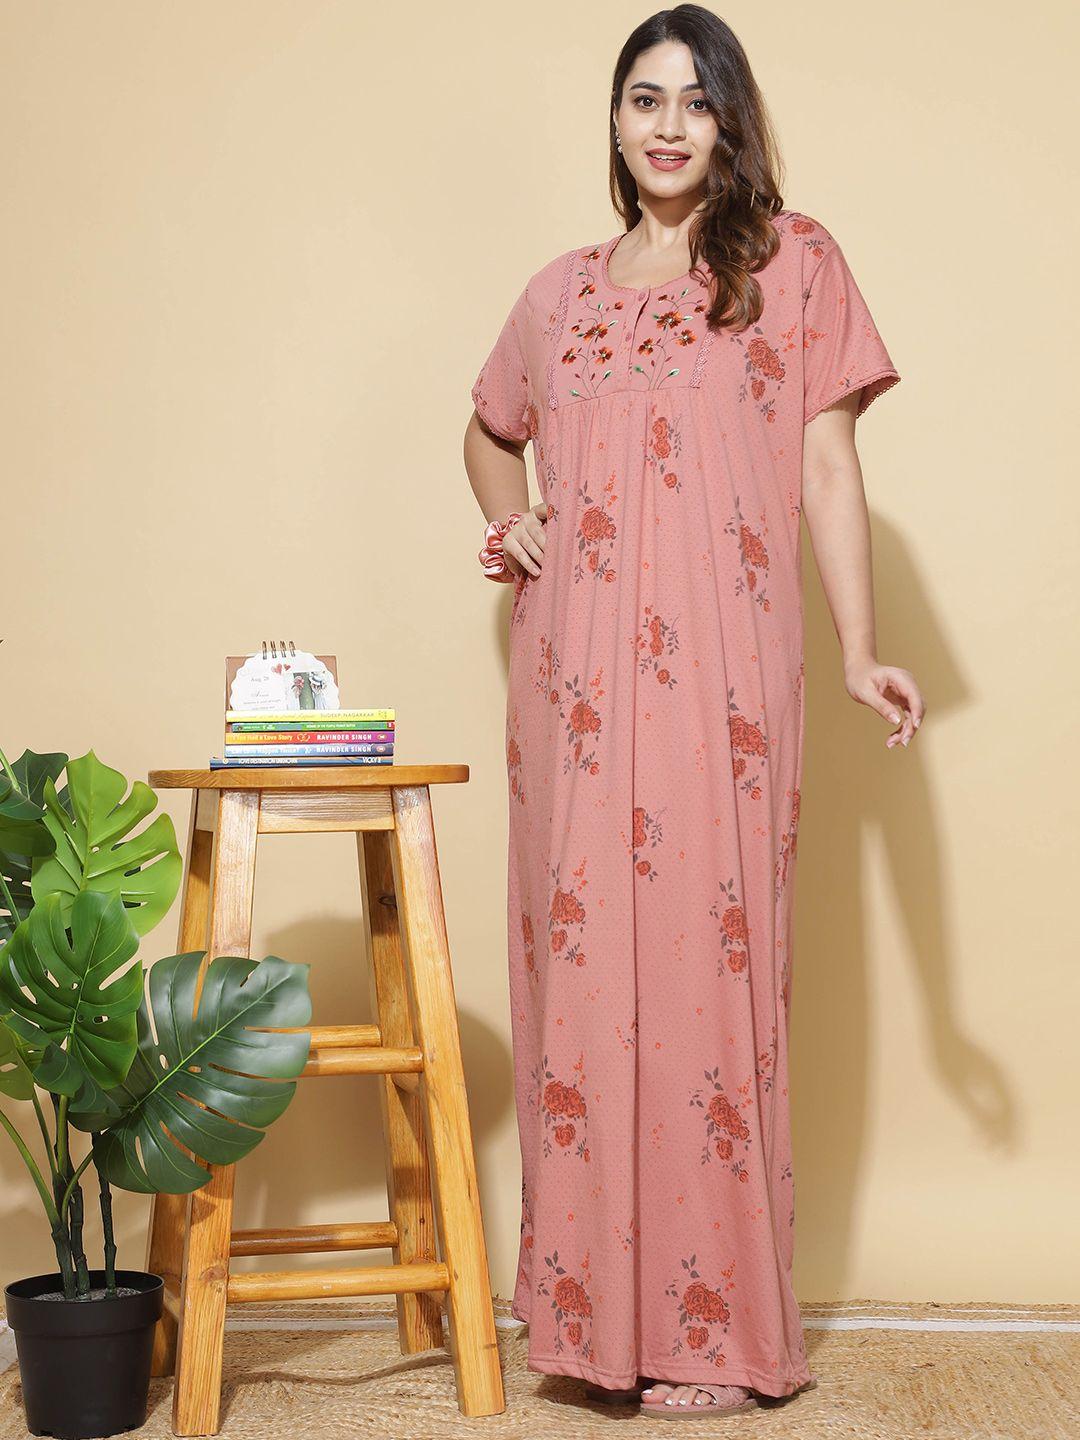 9shines-label-floral-printed-round-neck-maxi-nightdress